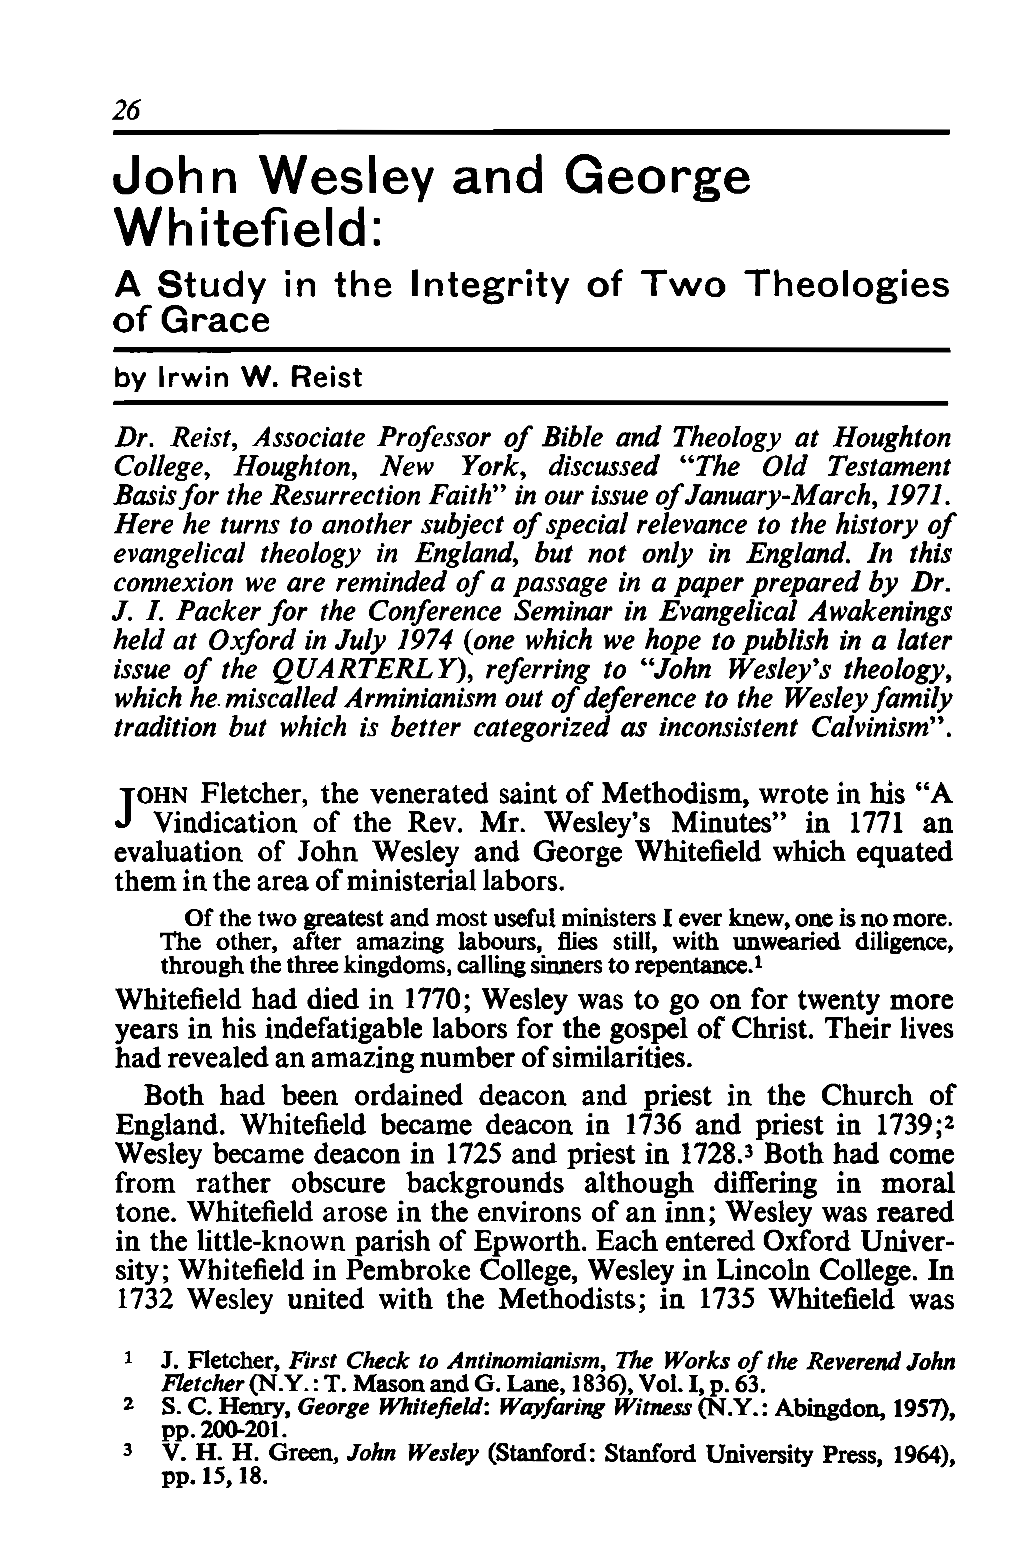 John Wesley and George Wh Itefield: a Study in the Integrity of Two Theologies of Grace by Irwin W